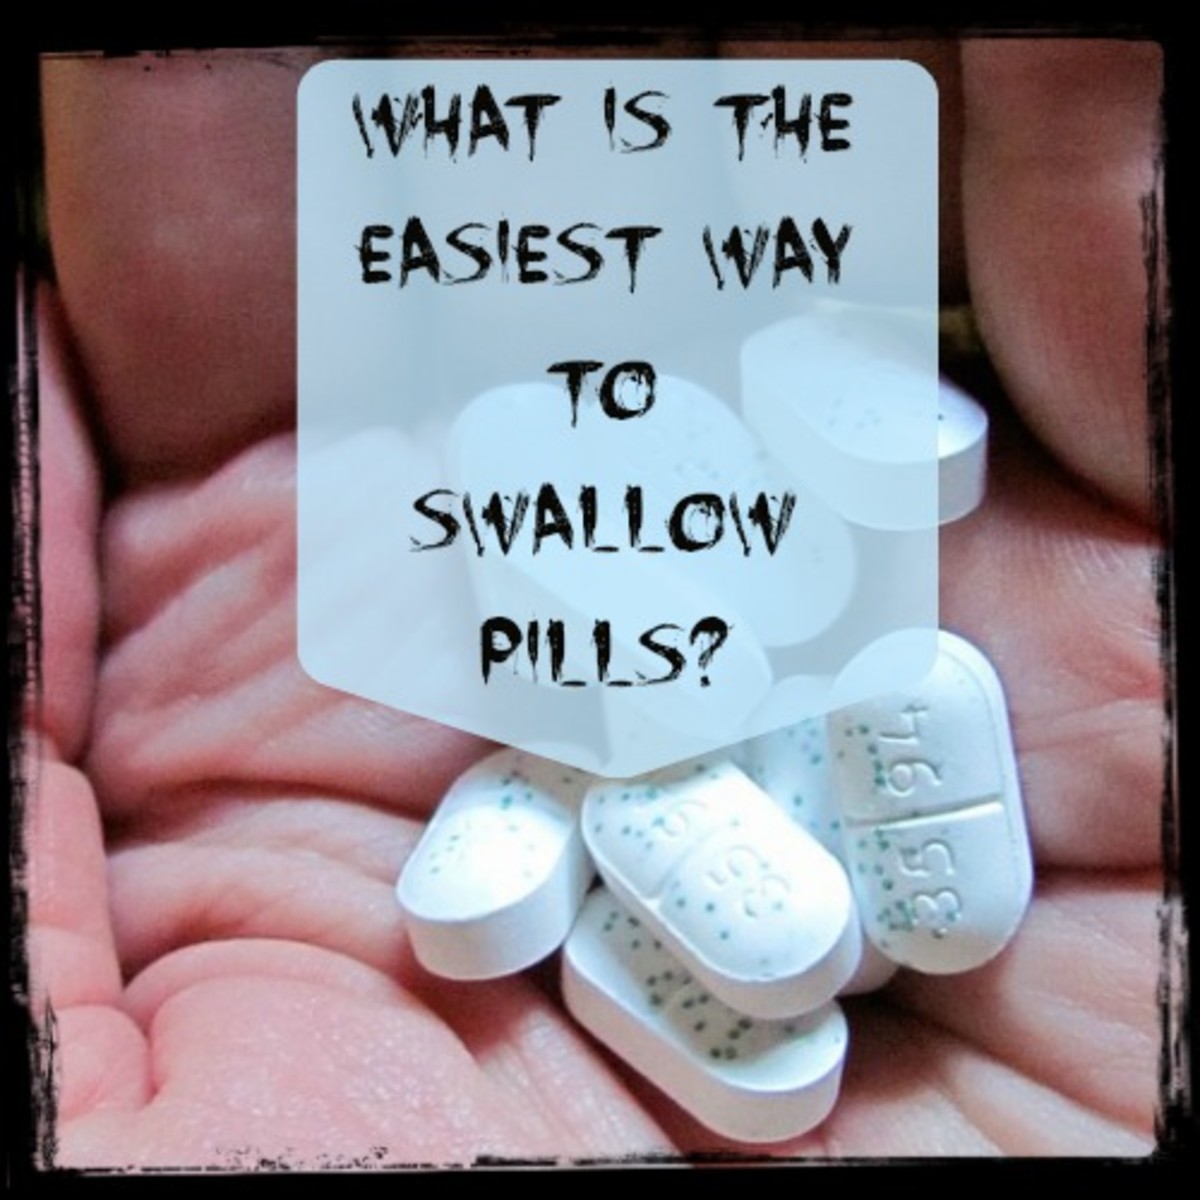 What Is The Easiest Way To Swallow Pills?